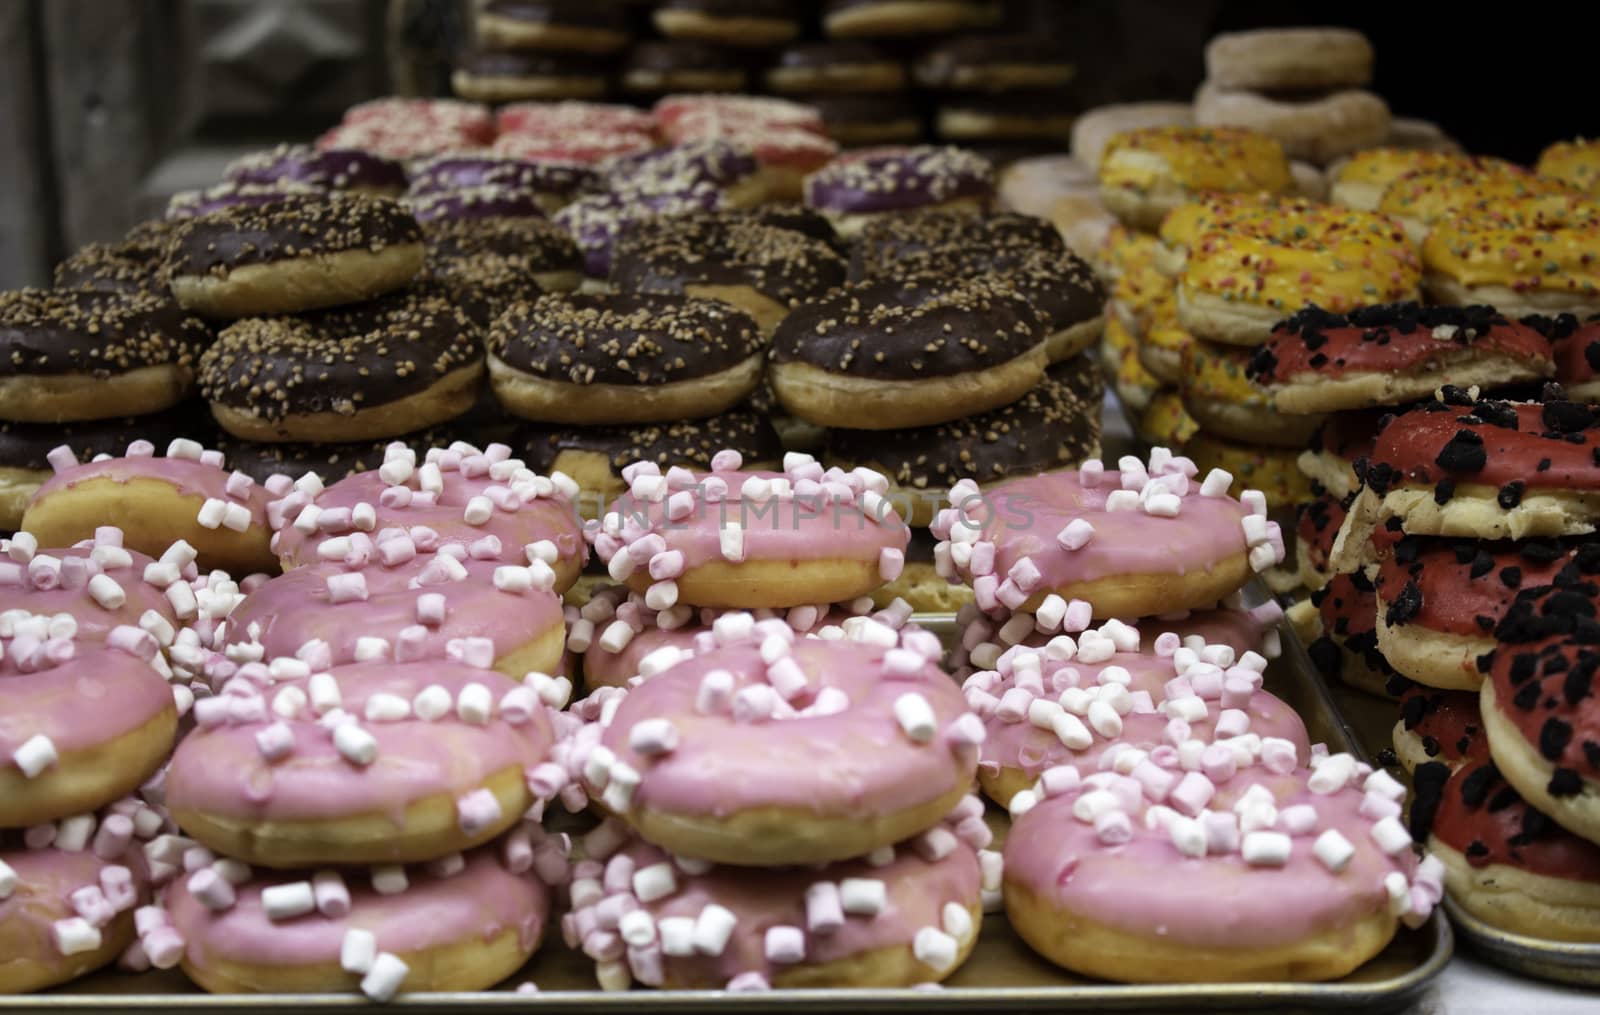 Donuts with chocolate and caramel in pastry, food and desserts